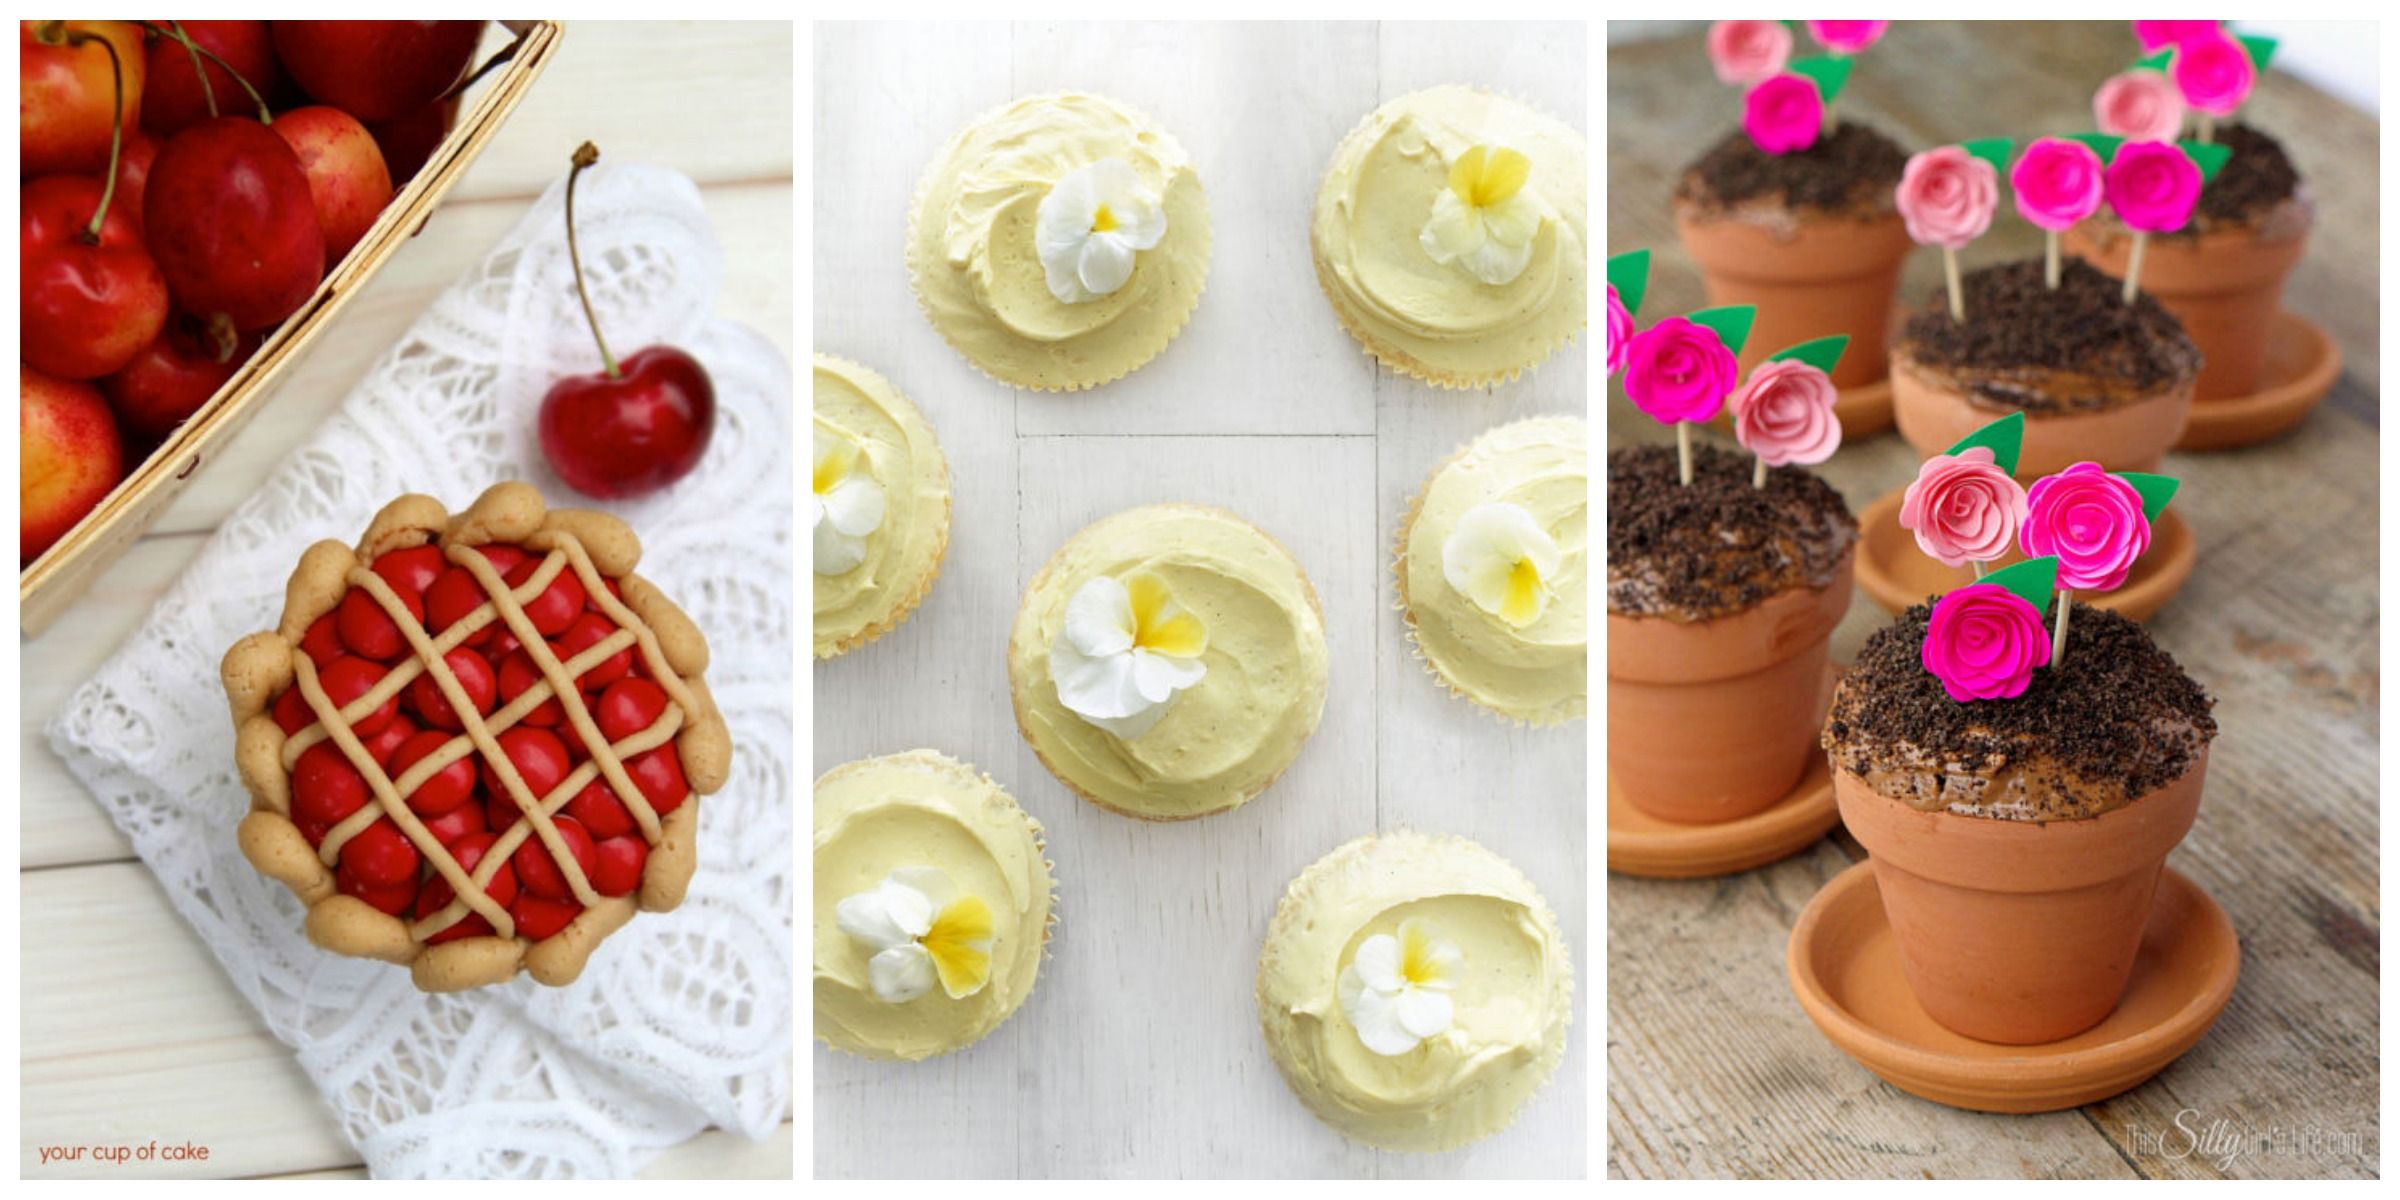 30 Best Cupcake Decorating Ideas - Easy Recipes For Homemade Cupcakes